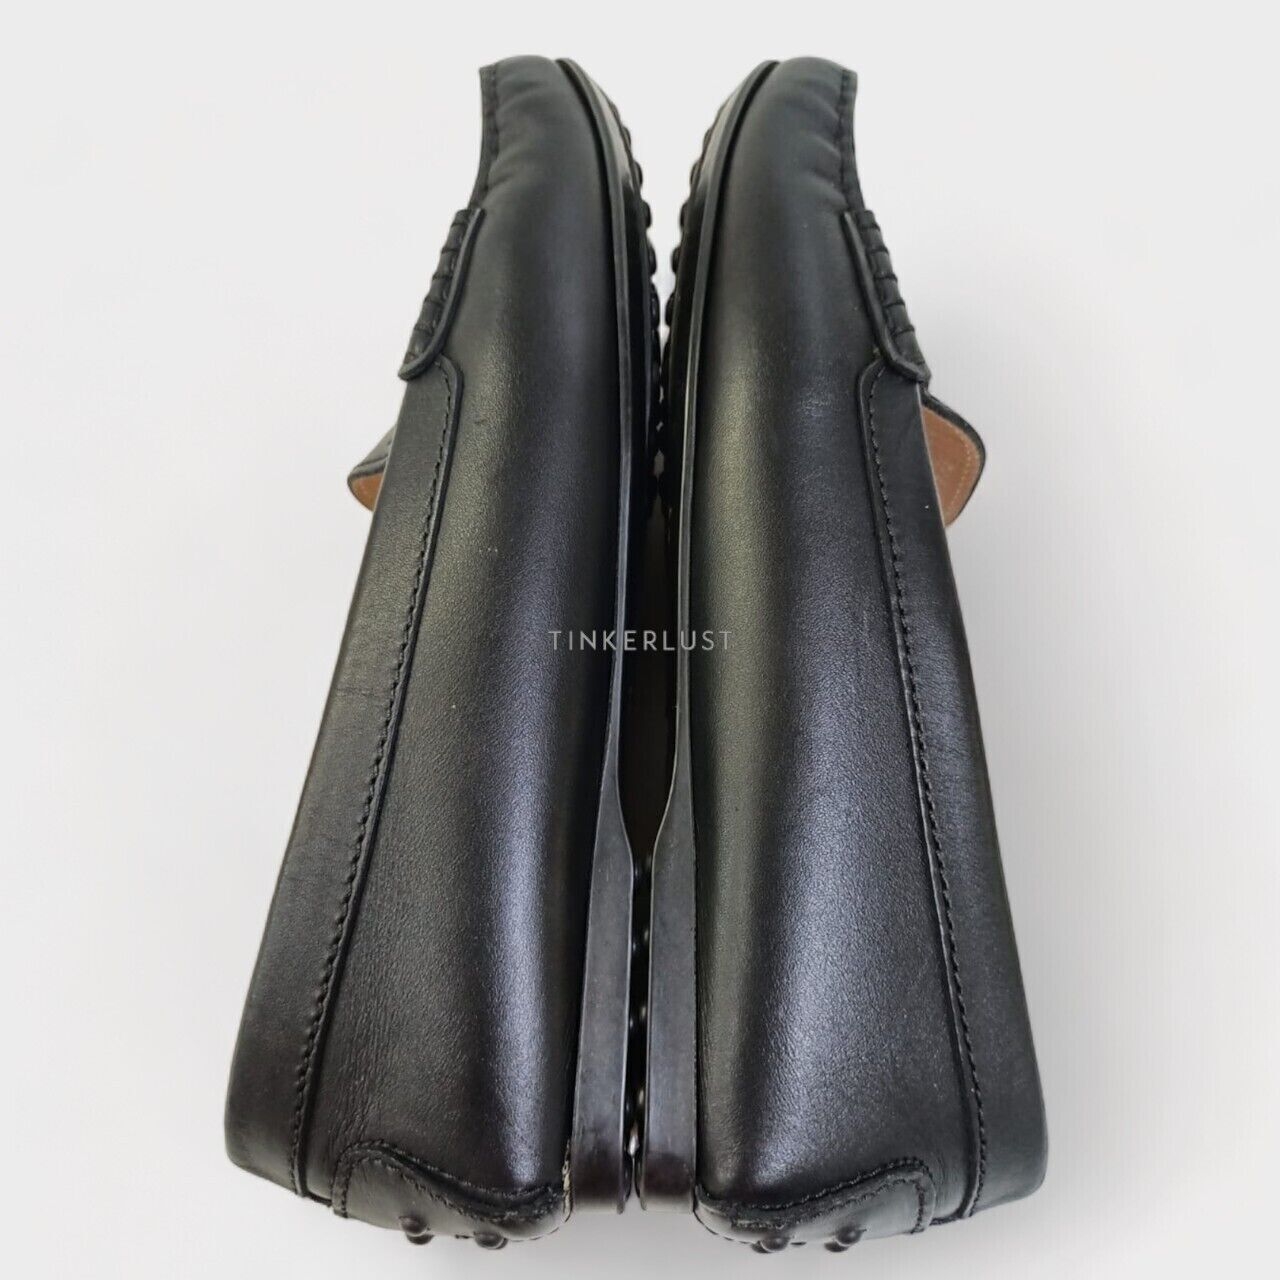 Tod's Gommino Black Leather Loafers